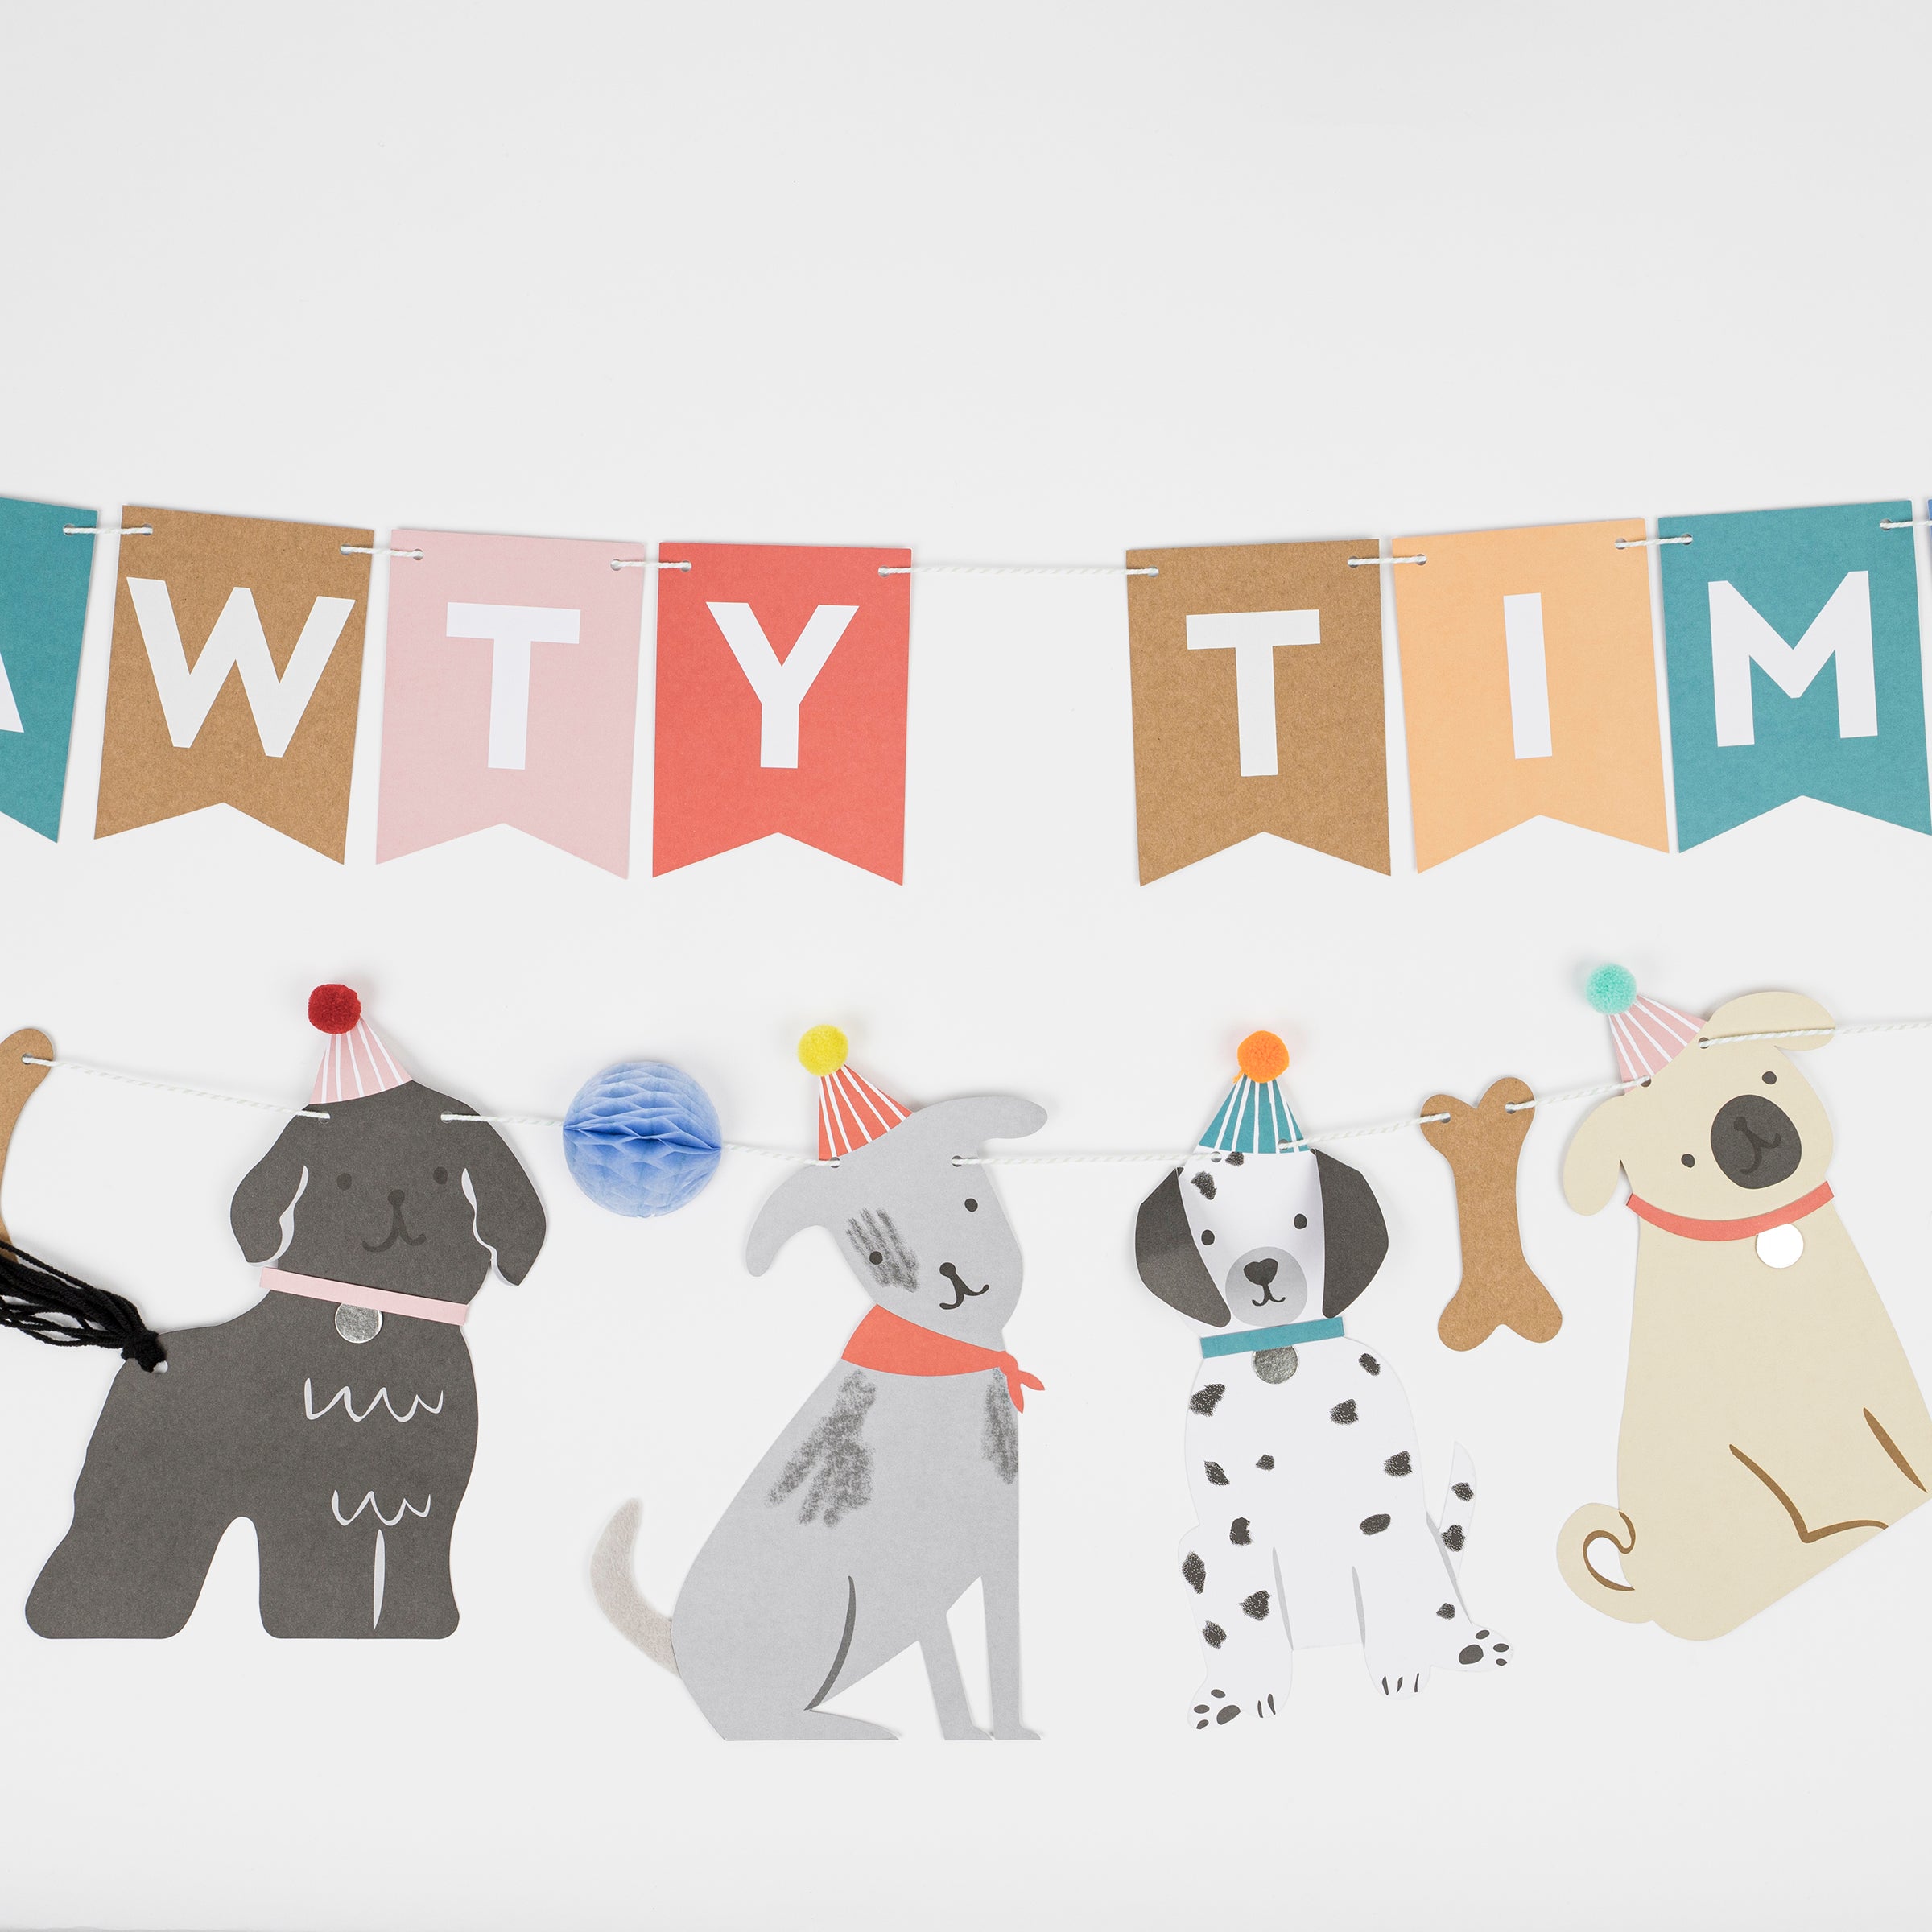 This adorable paper garland, featuring dogs, is perfect for a dog's birthday party or a dog themed party.